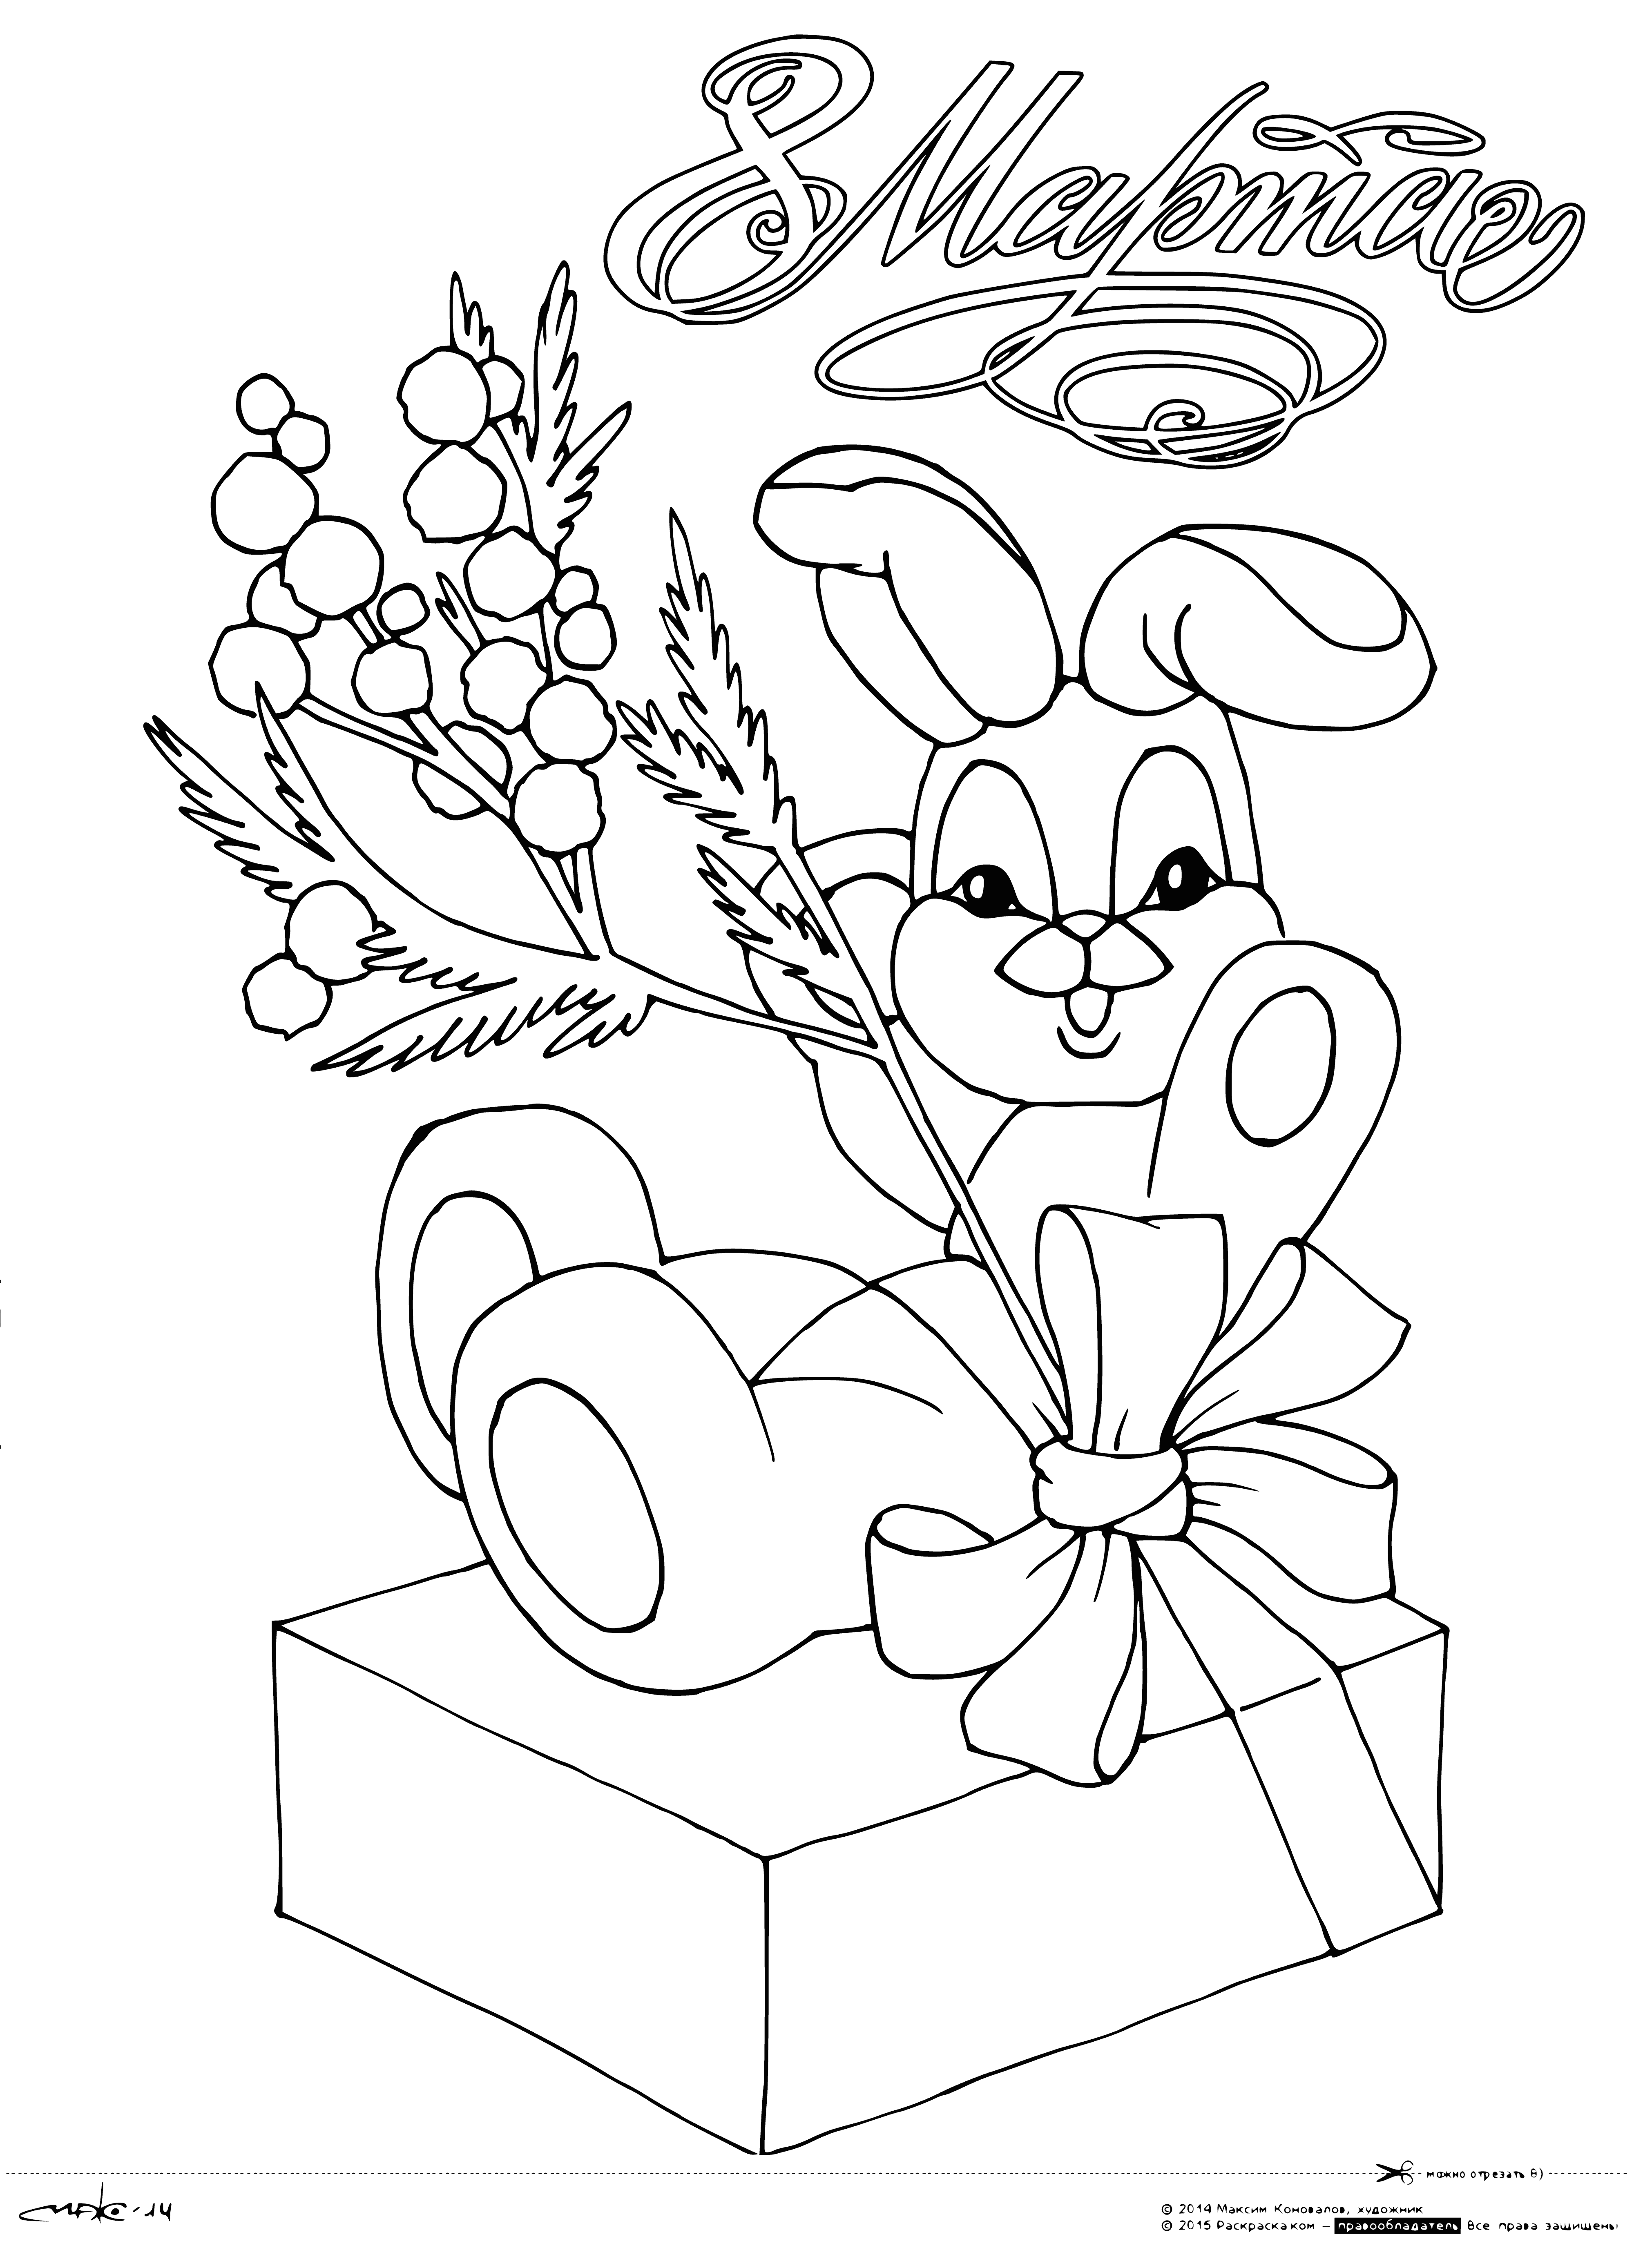 coloring page: Coloring page of flowers & cupcake: pink, white & purple flowers; pink cupcake w/ white frosting, green stem. #coloringpage